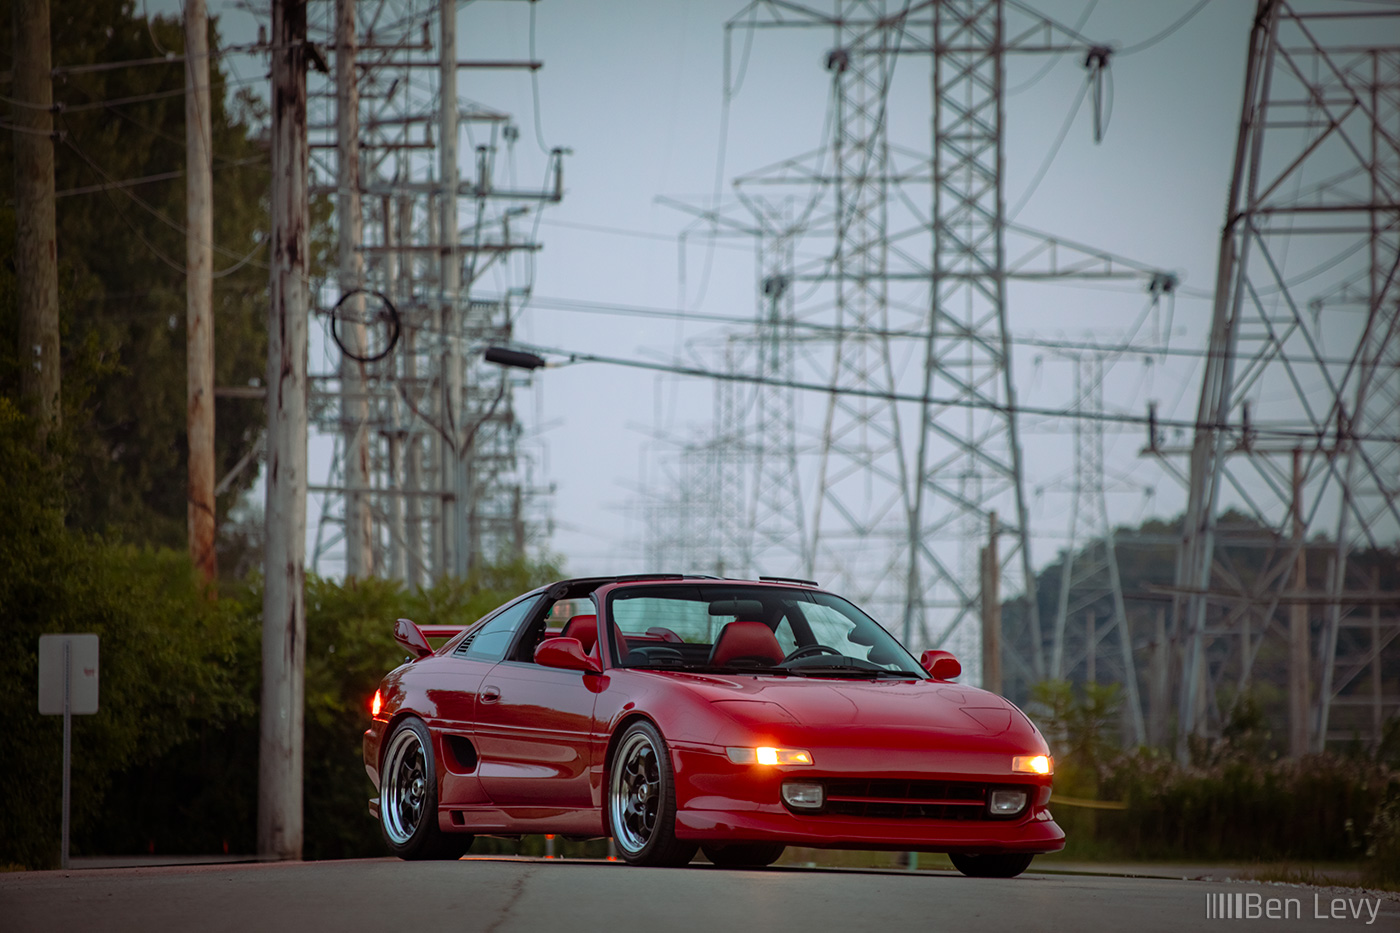 Red Toyota MR2 Turbo on a Backroad with Powerlines